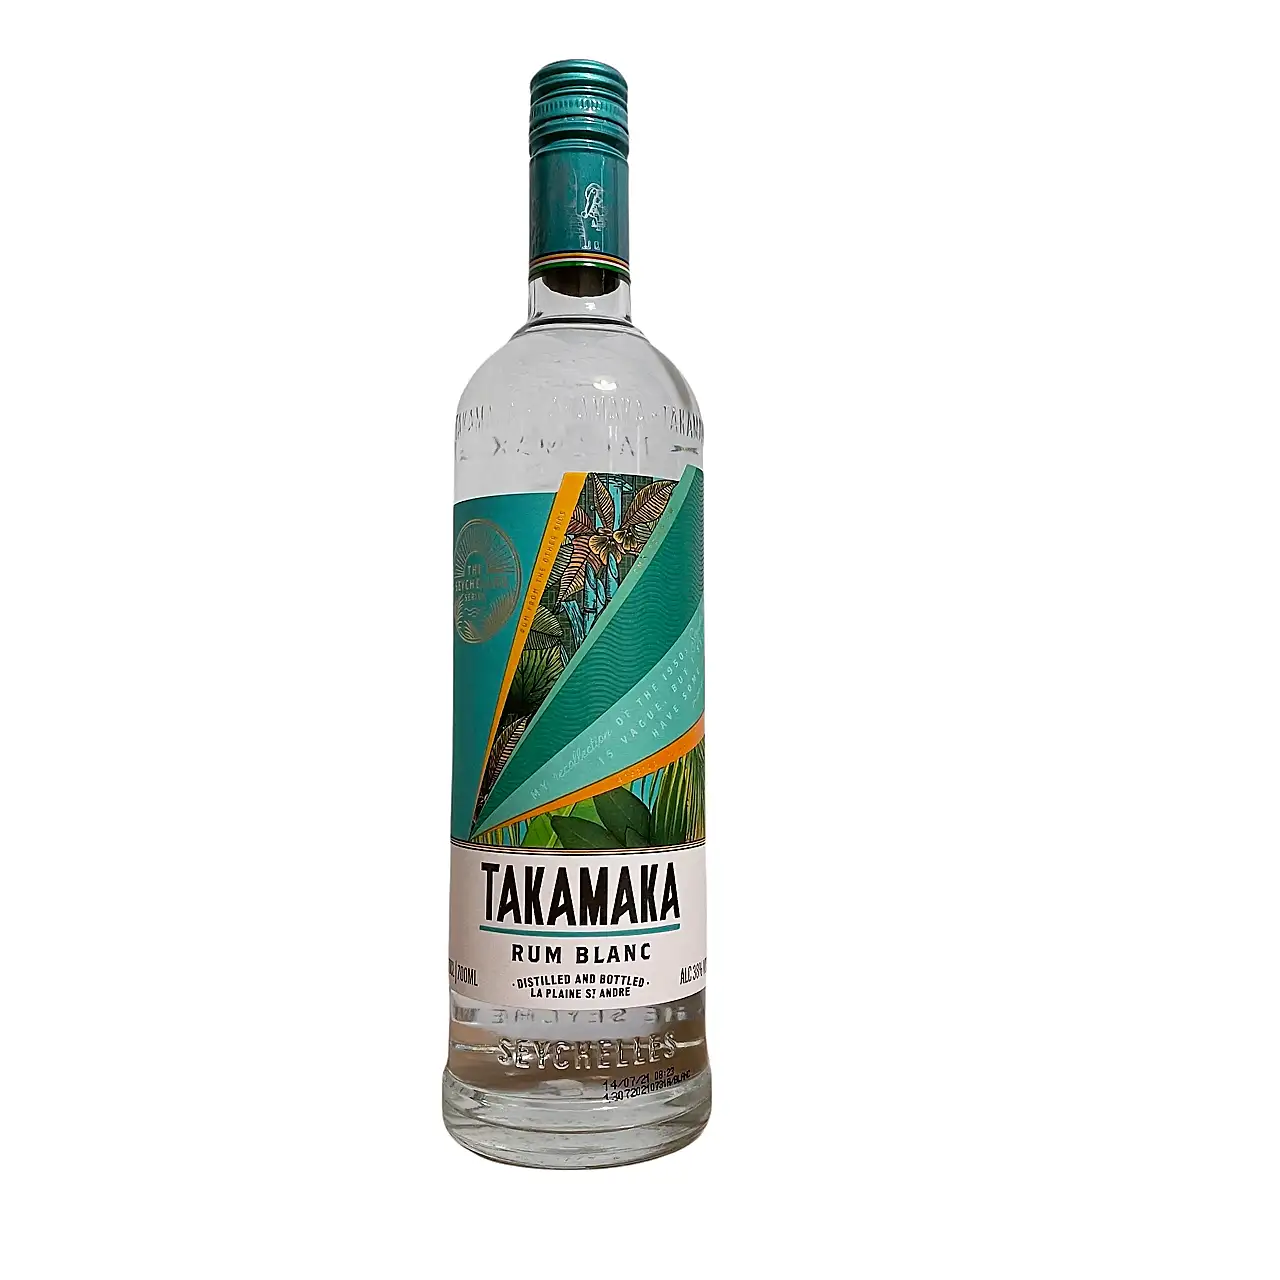 Image of the front of the bottle of the rum Takamaka Rum Blanc